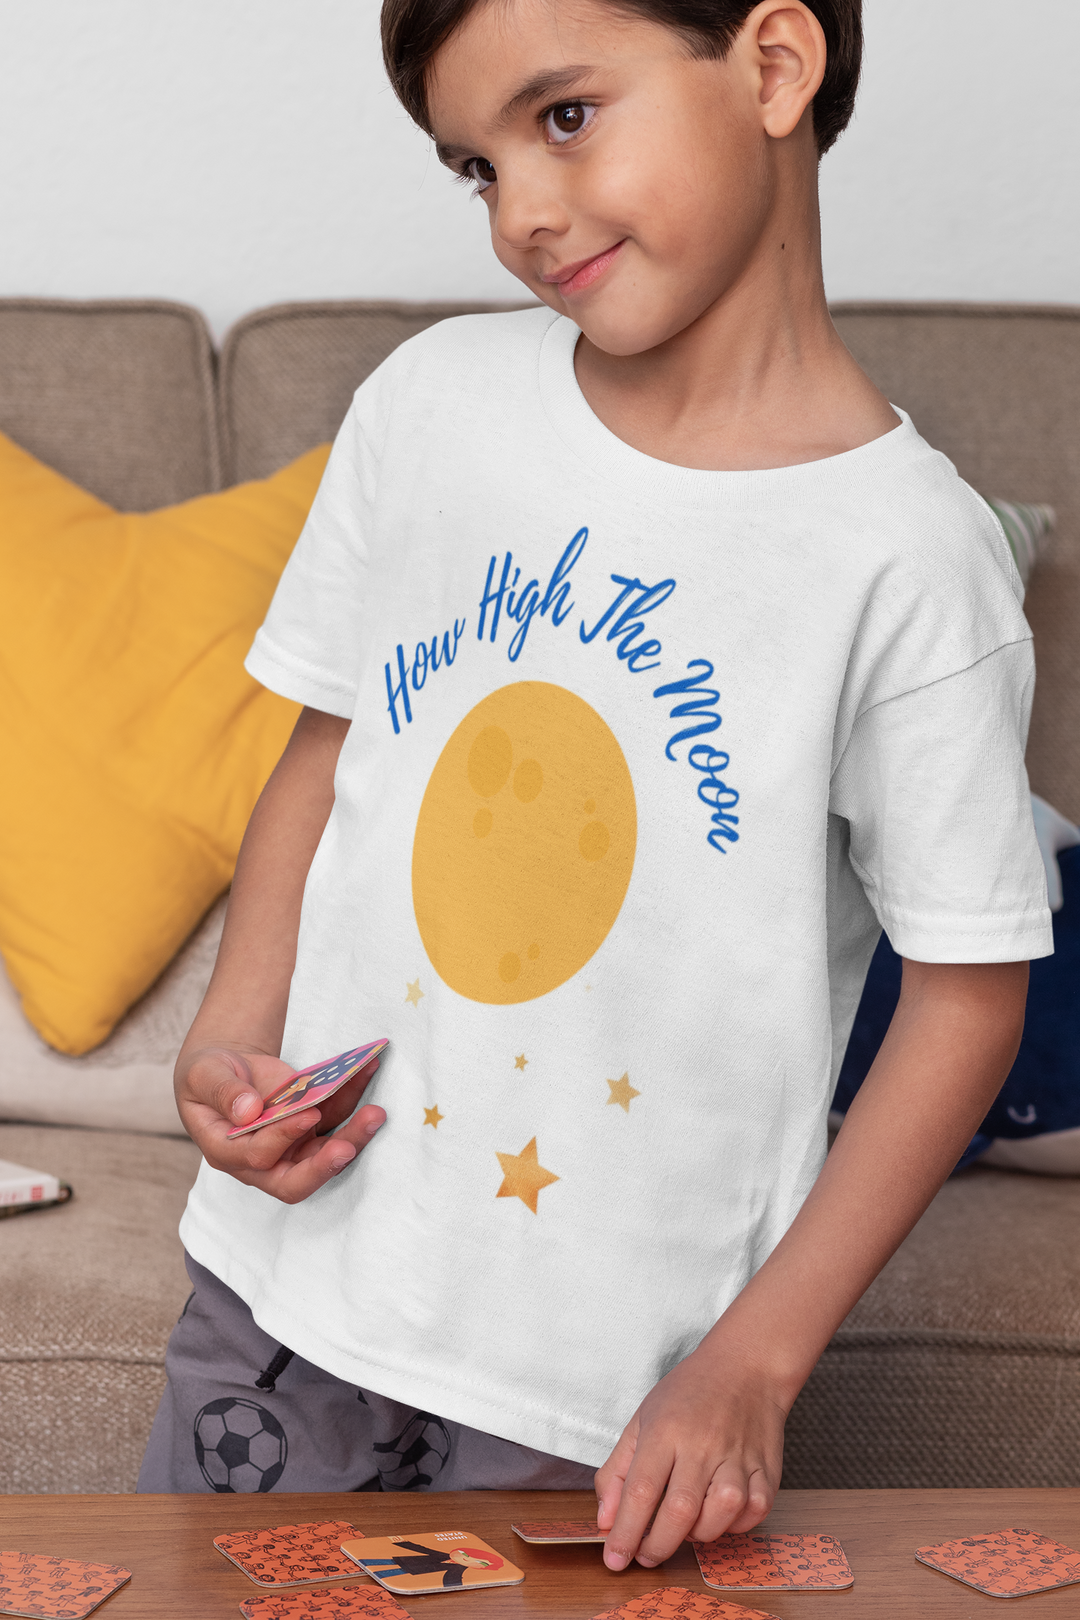 How High the Moon. Short sleeve t shirt for toddler and kids. - TeesForToddlersandKids -  t-shirt - jazz - how-high-the-moon-short-sleeve-t-shirt-for-toddler-and-kids-the-jazz-series